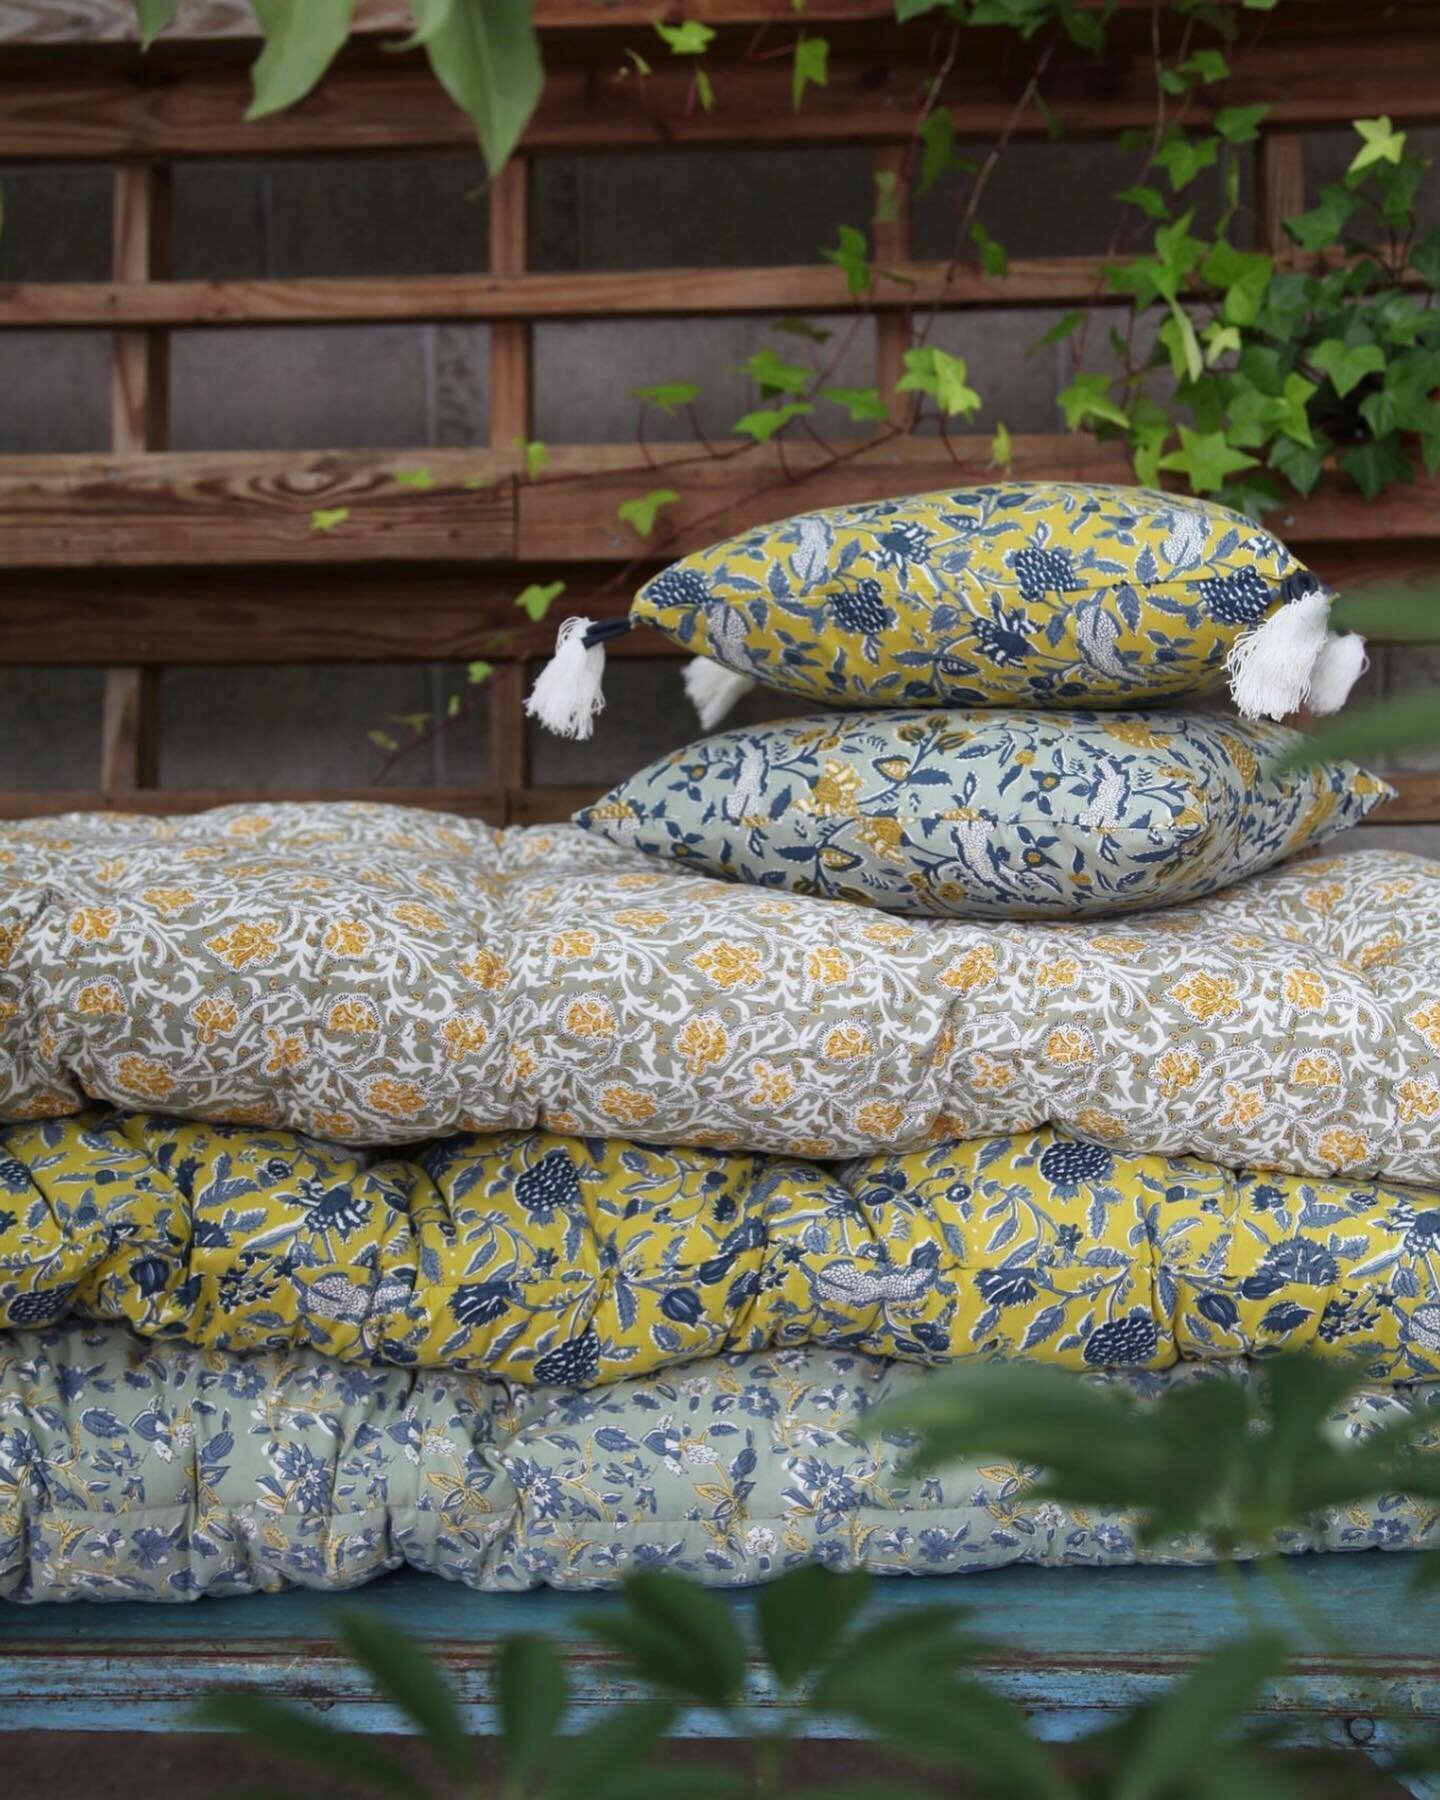 August afternoons are made for relaxing. Get cozy with our collection of cushions and pillows. #outdoorstyle

#dundeegardens #outdoorpillows #summer #summertime #shopnepa #shopsmall #smallbusiness #outdoorcushions